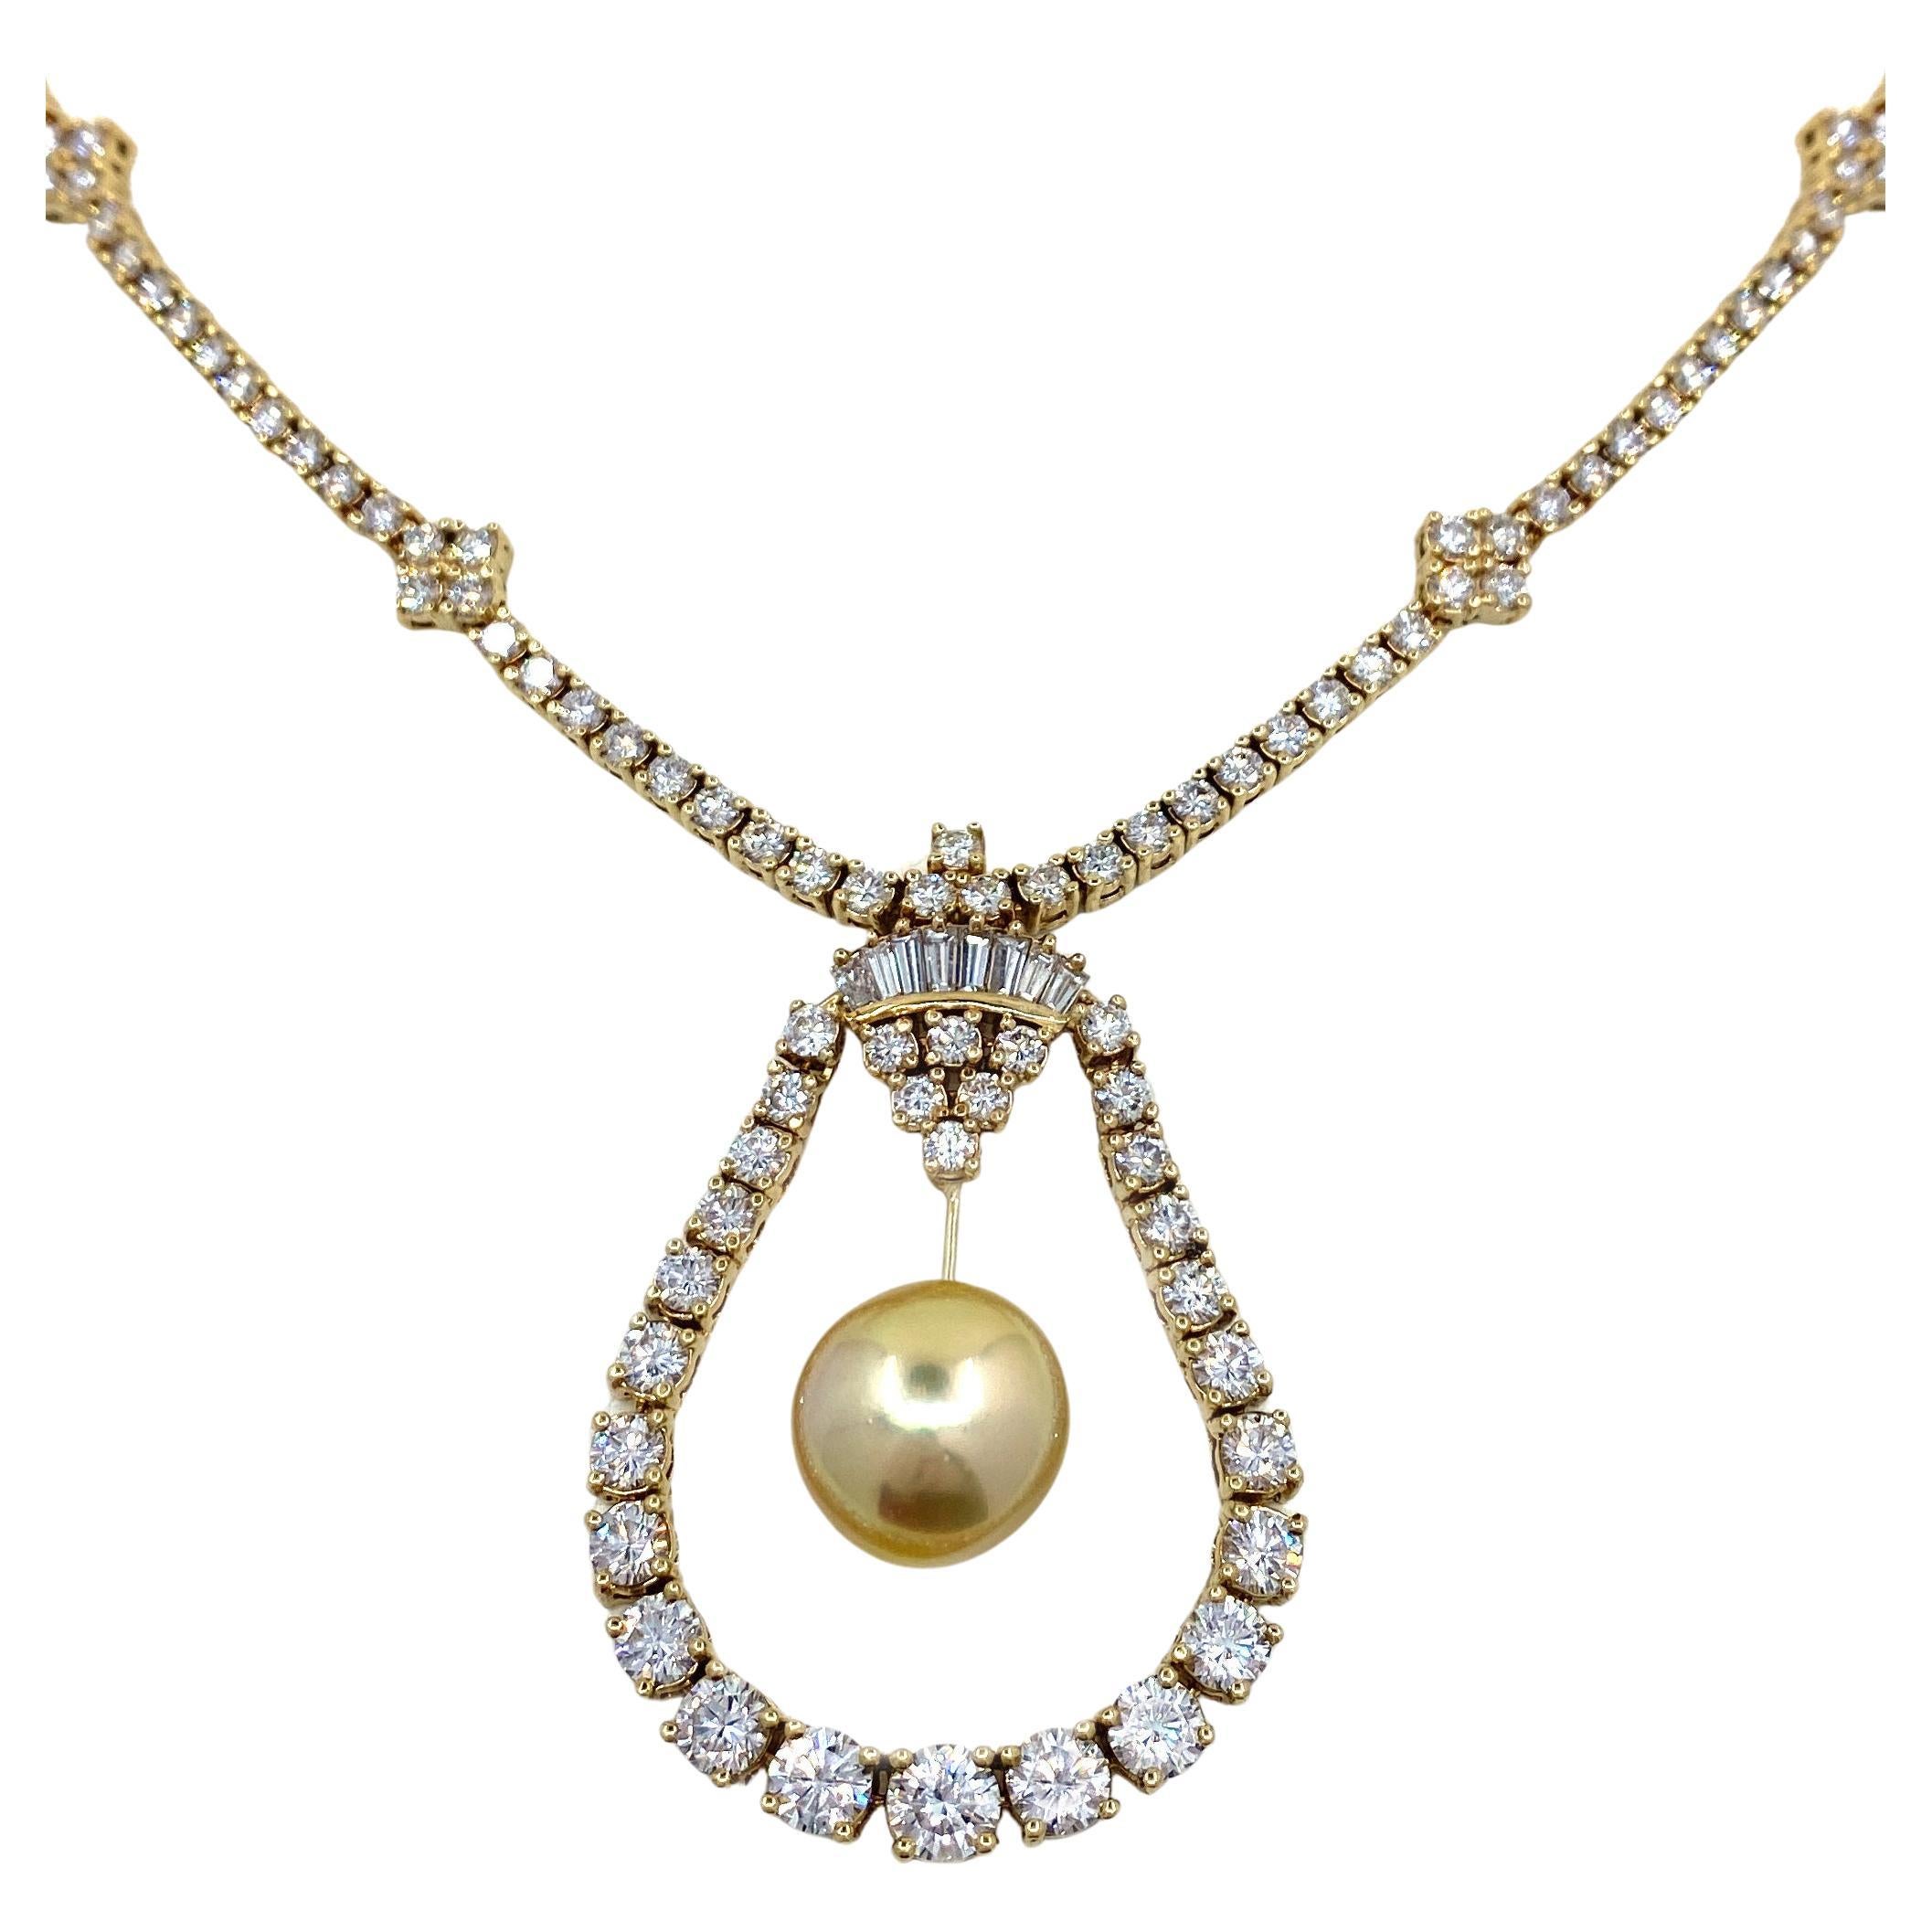 11 Carat Diamond Line Omega Necklace in Yellow Gold with Golden South Sea Pearl